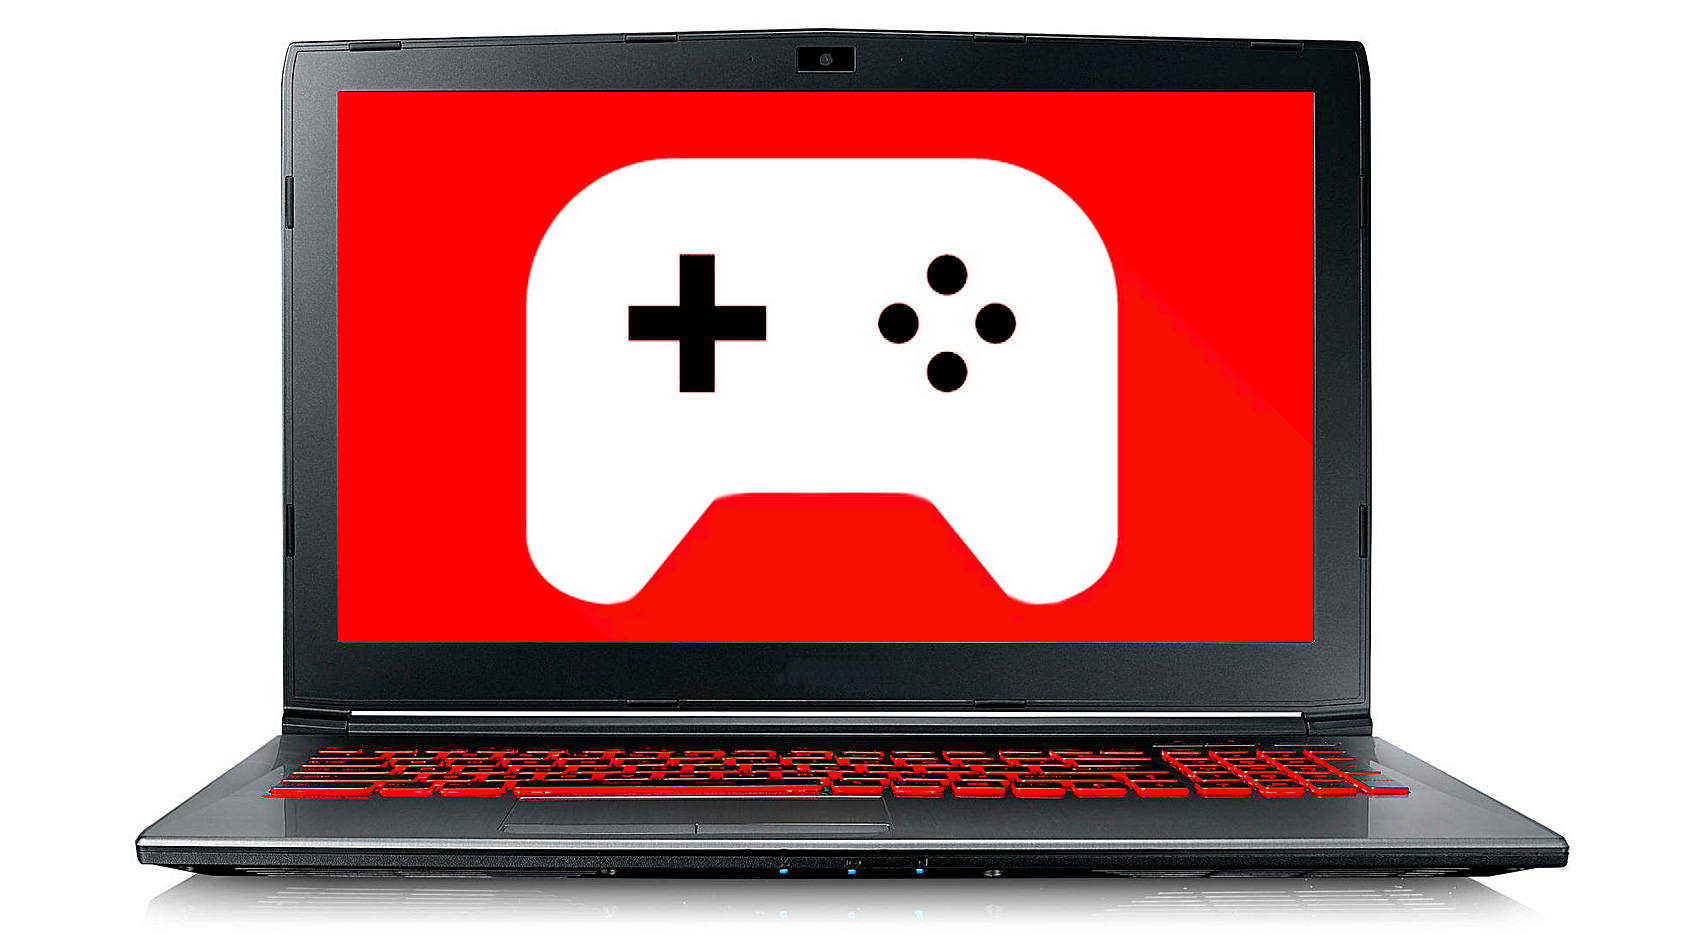 small gaming laptop with dedicated graphics card